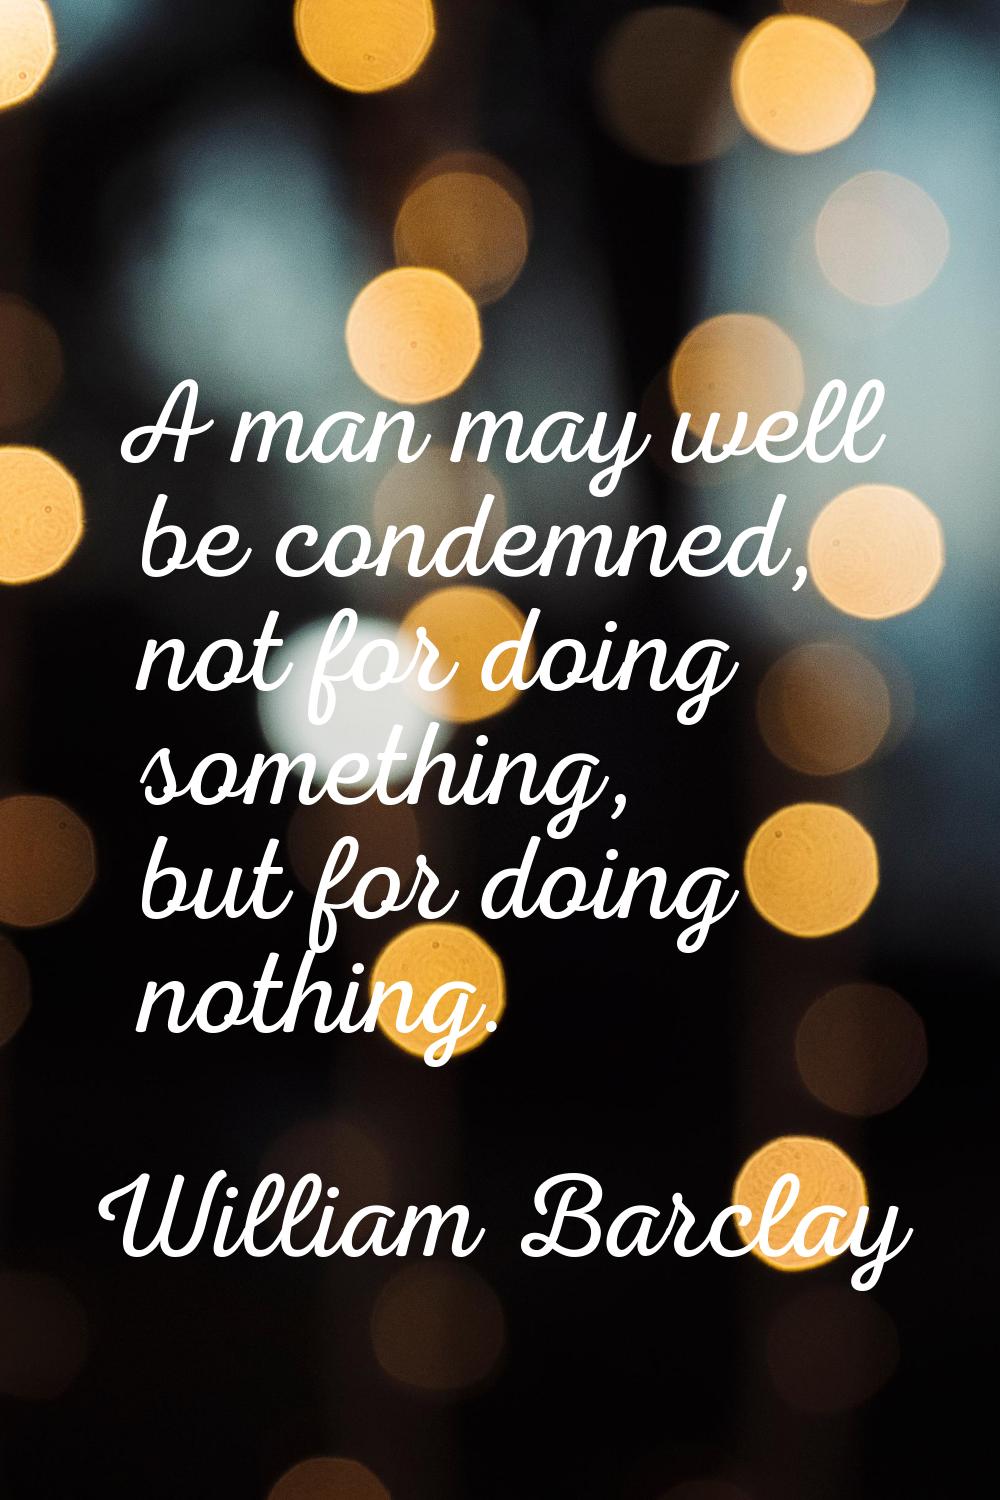 A man may well be condemned, not for doing something, but for doing nothing.